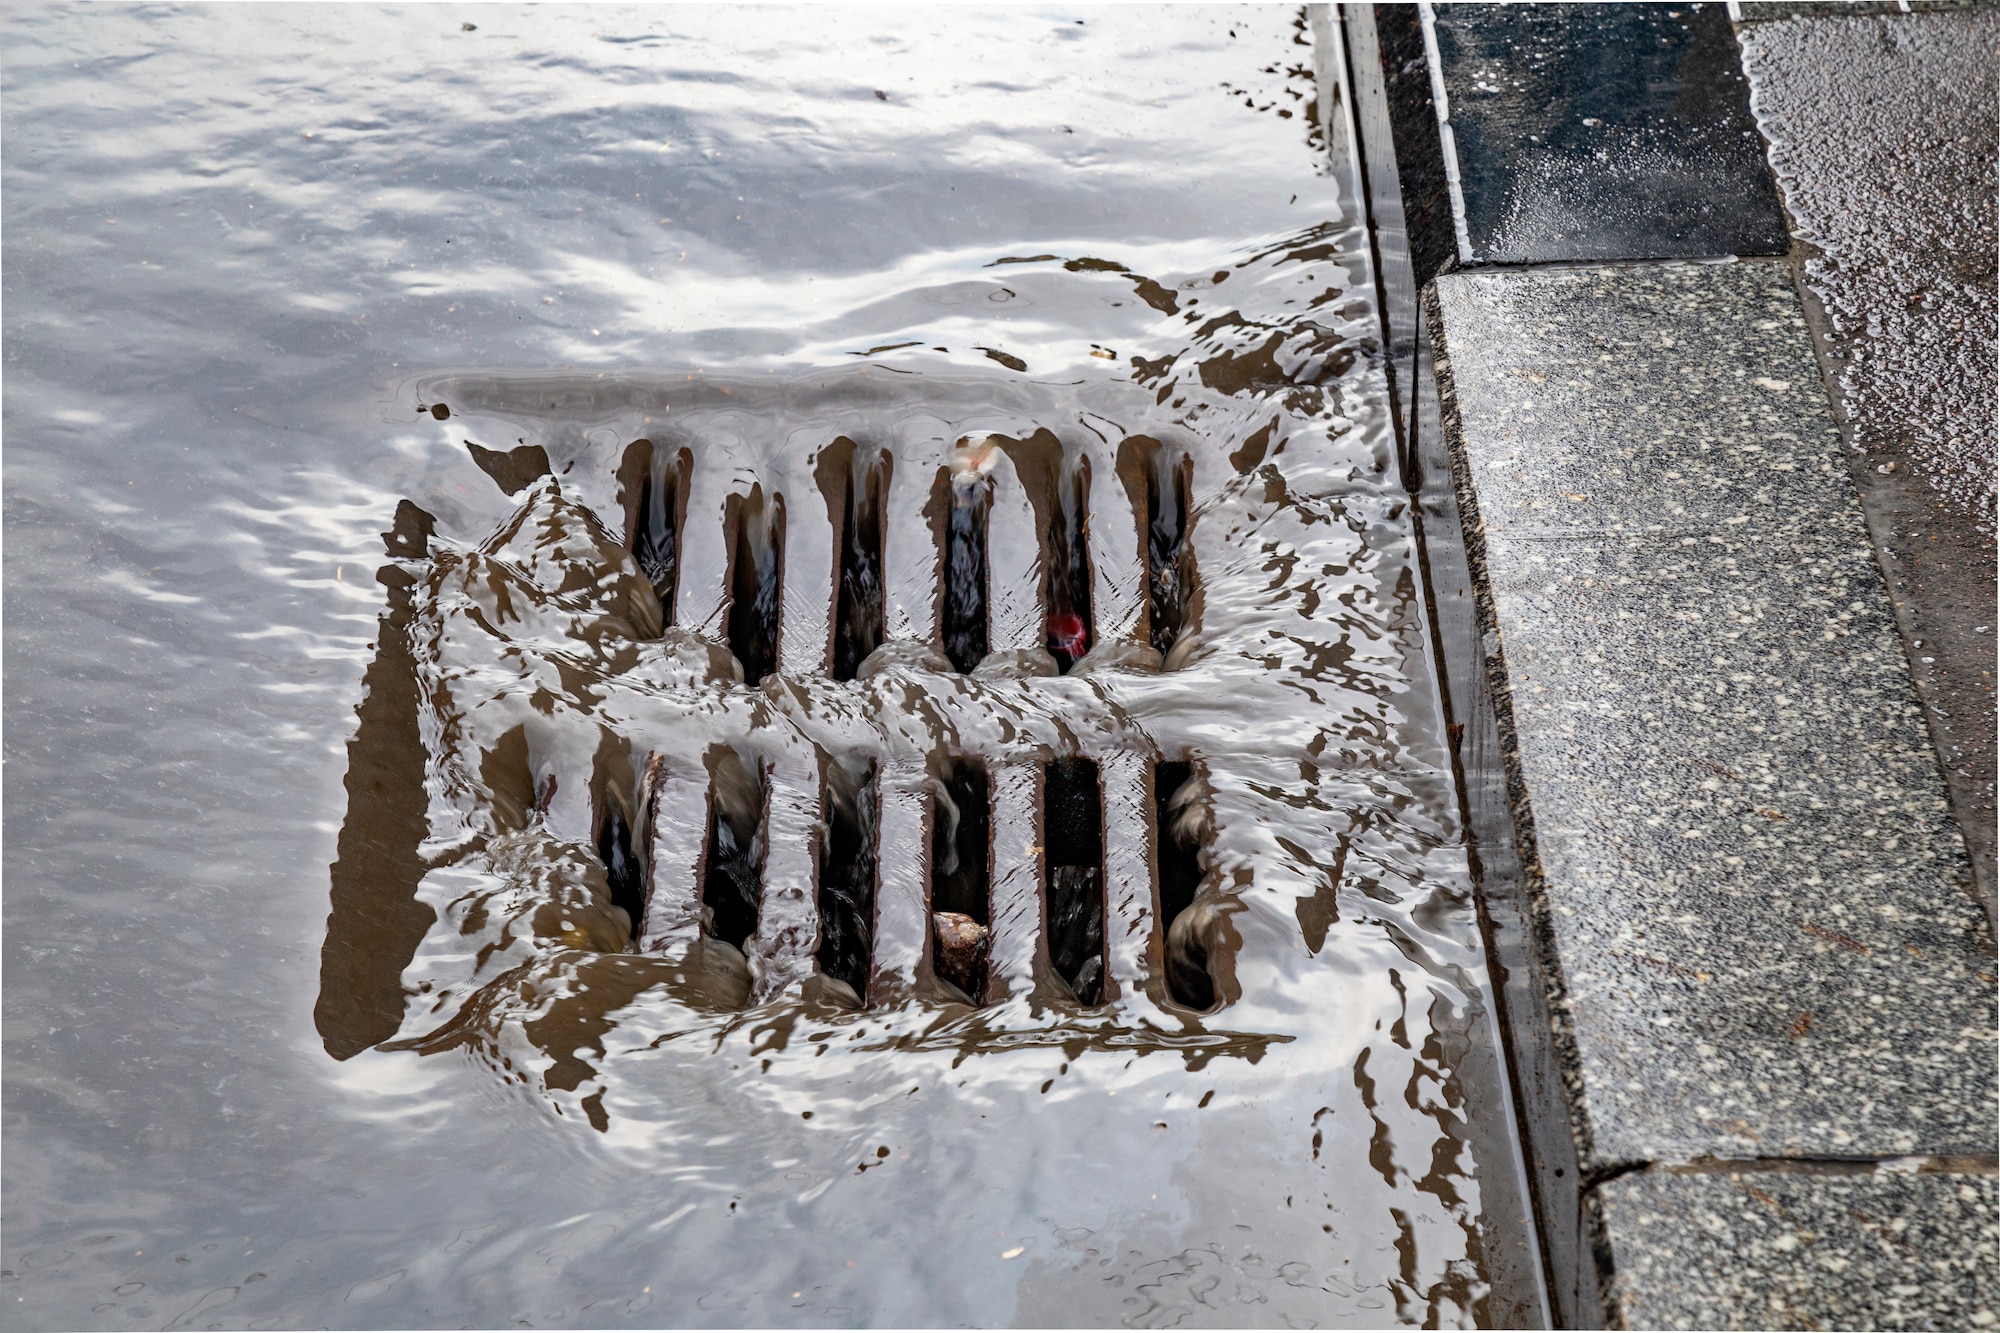 Photo shows water running into a street drain.